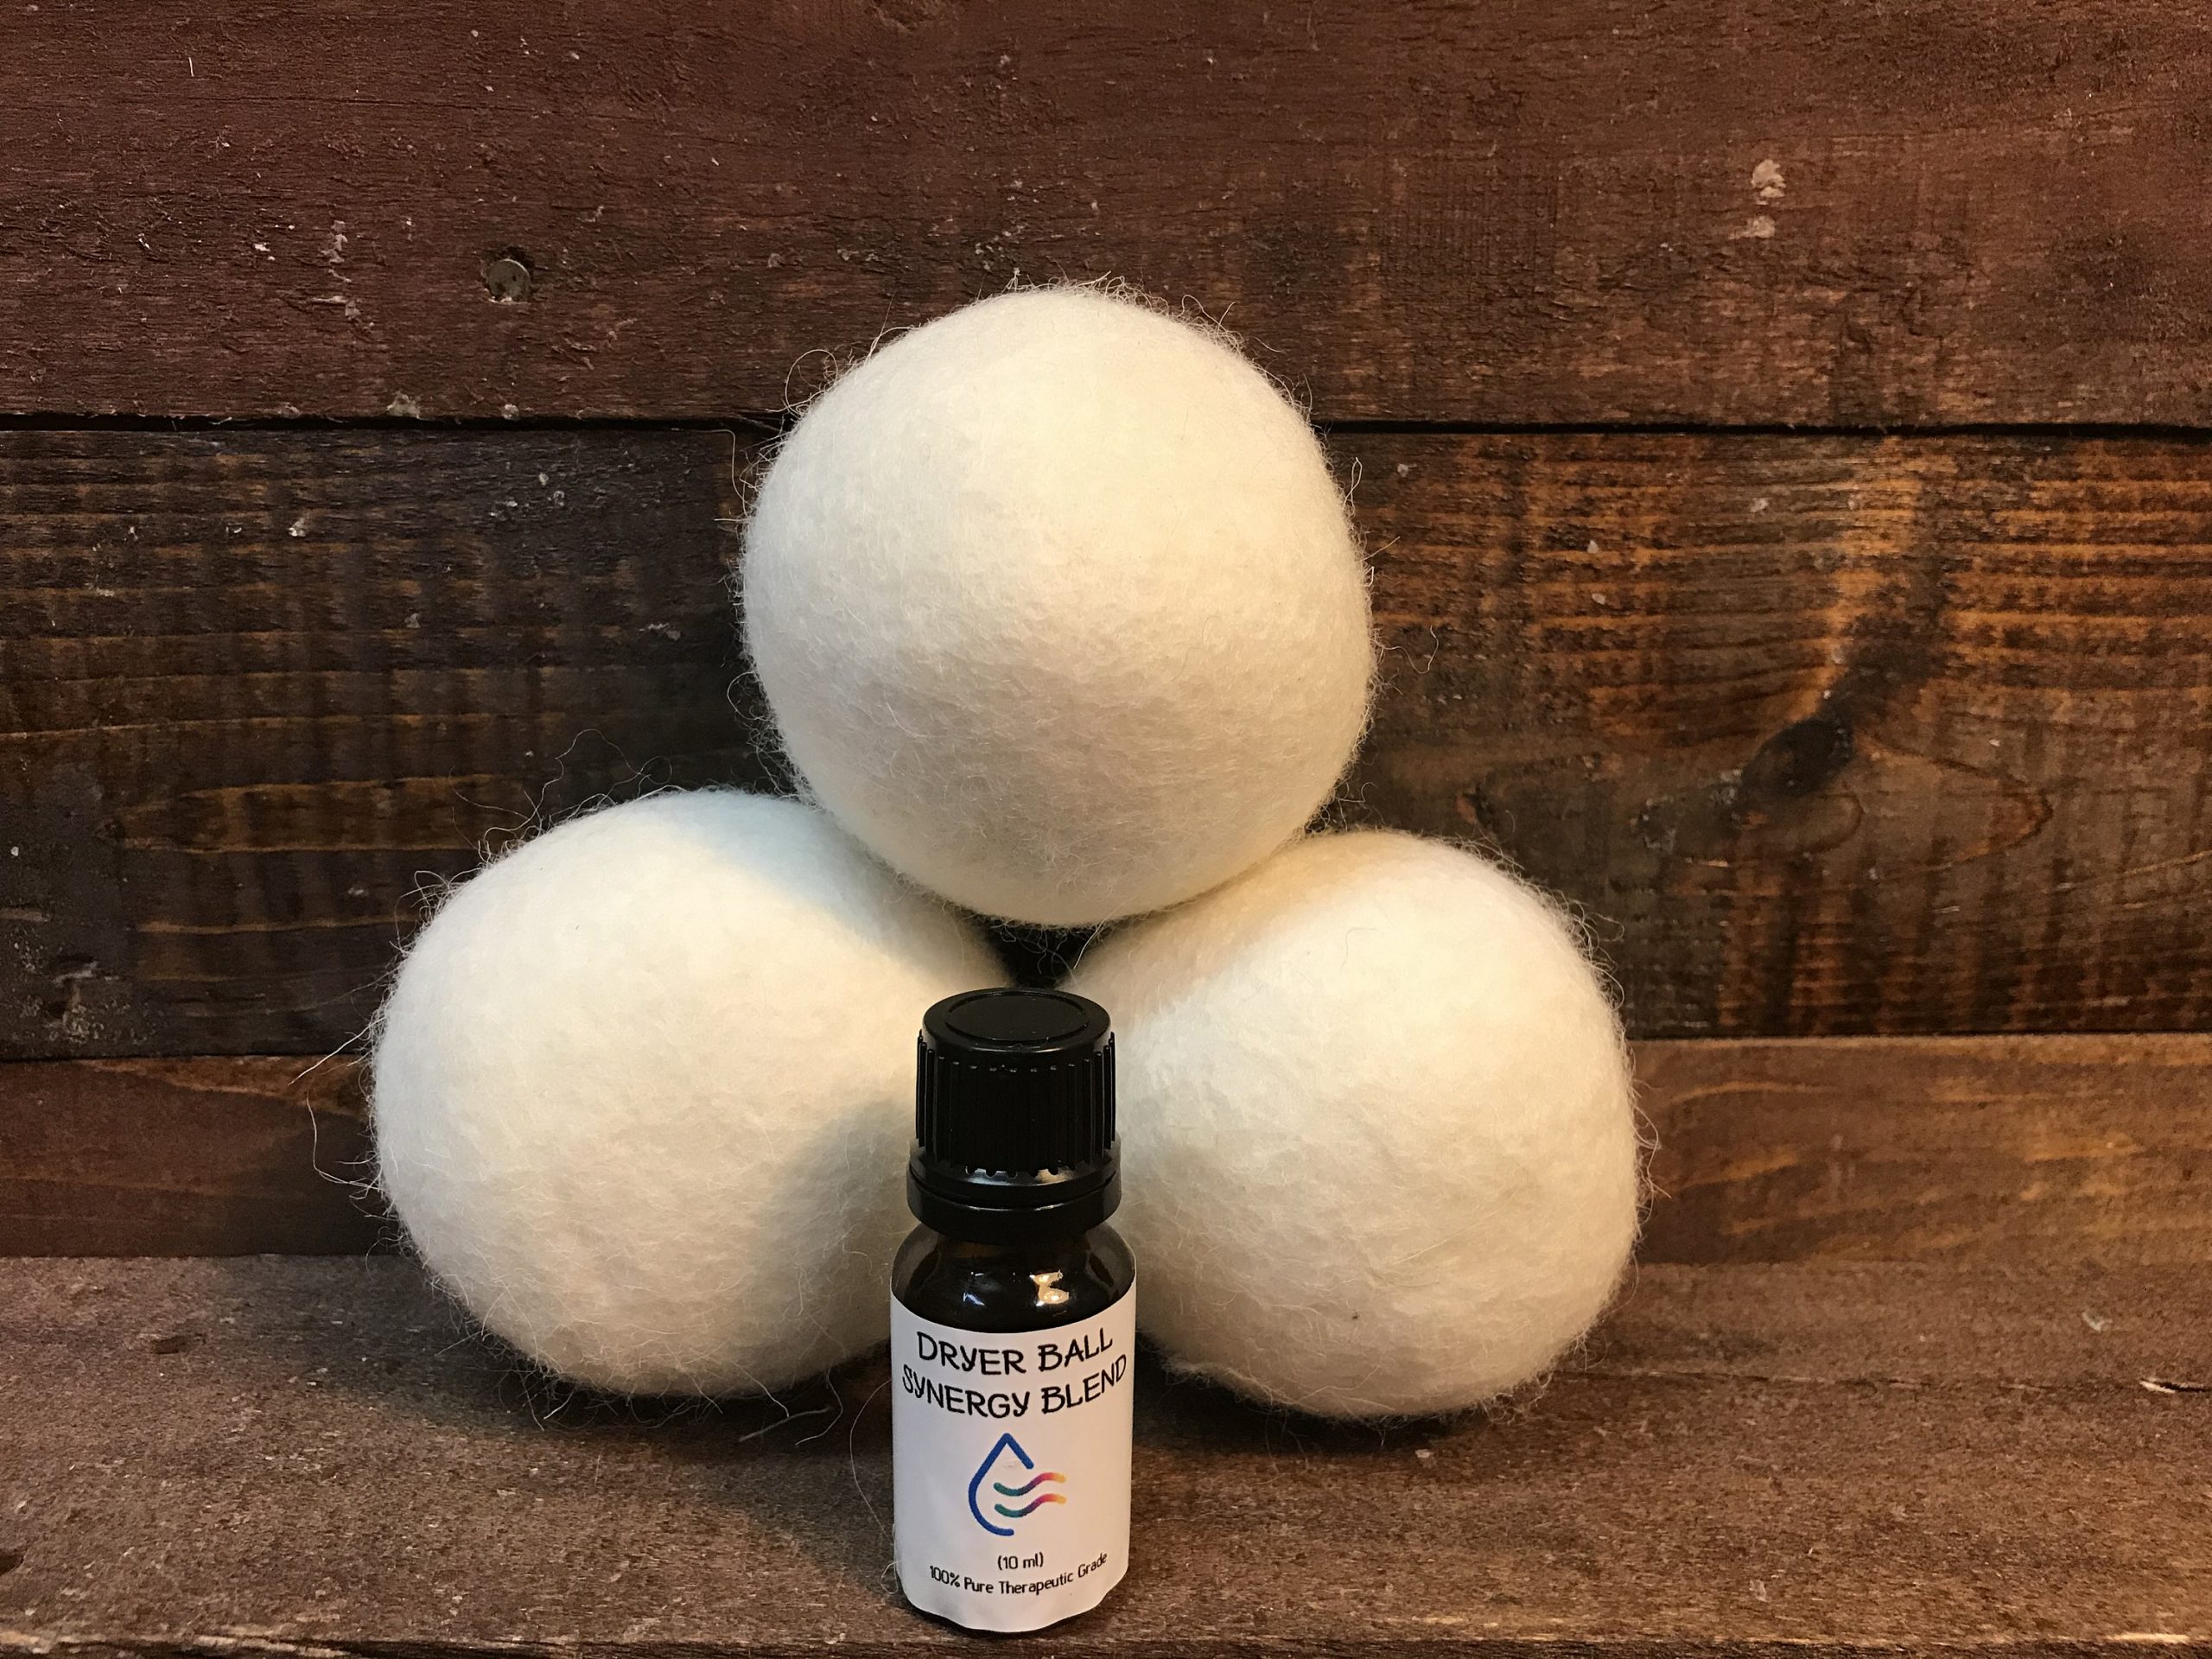 10 mL Essential Oil – Dryer Ball Synergy Blend – Soap Stop & Body Shop